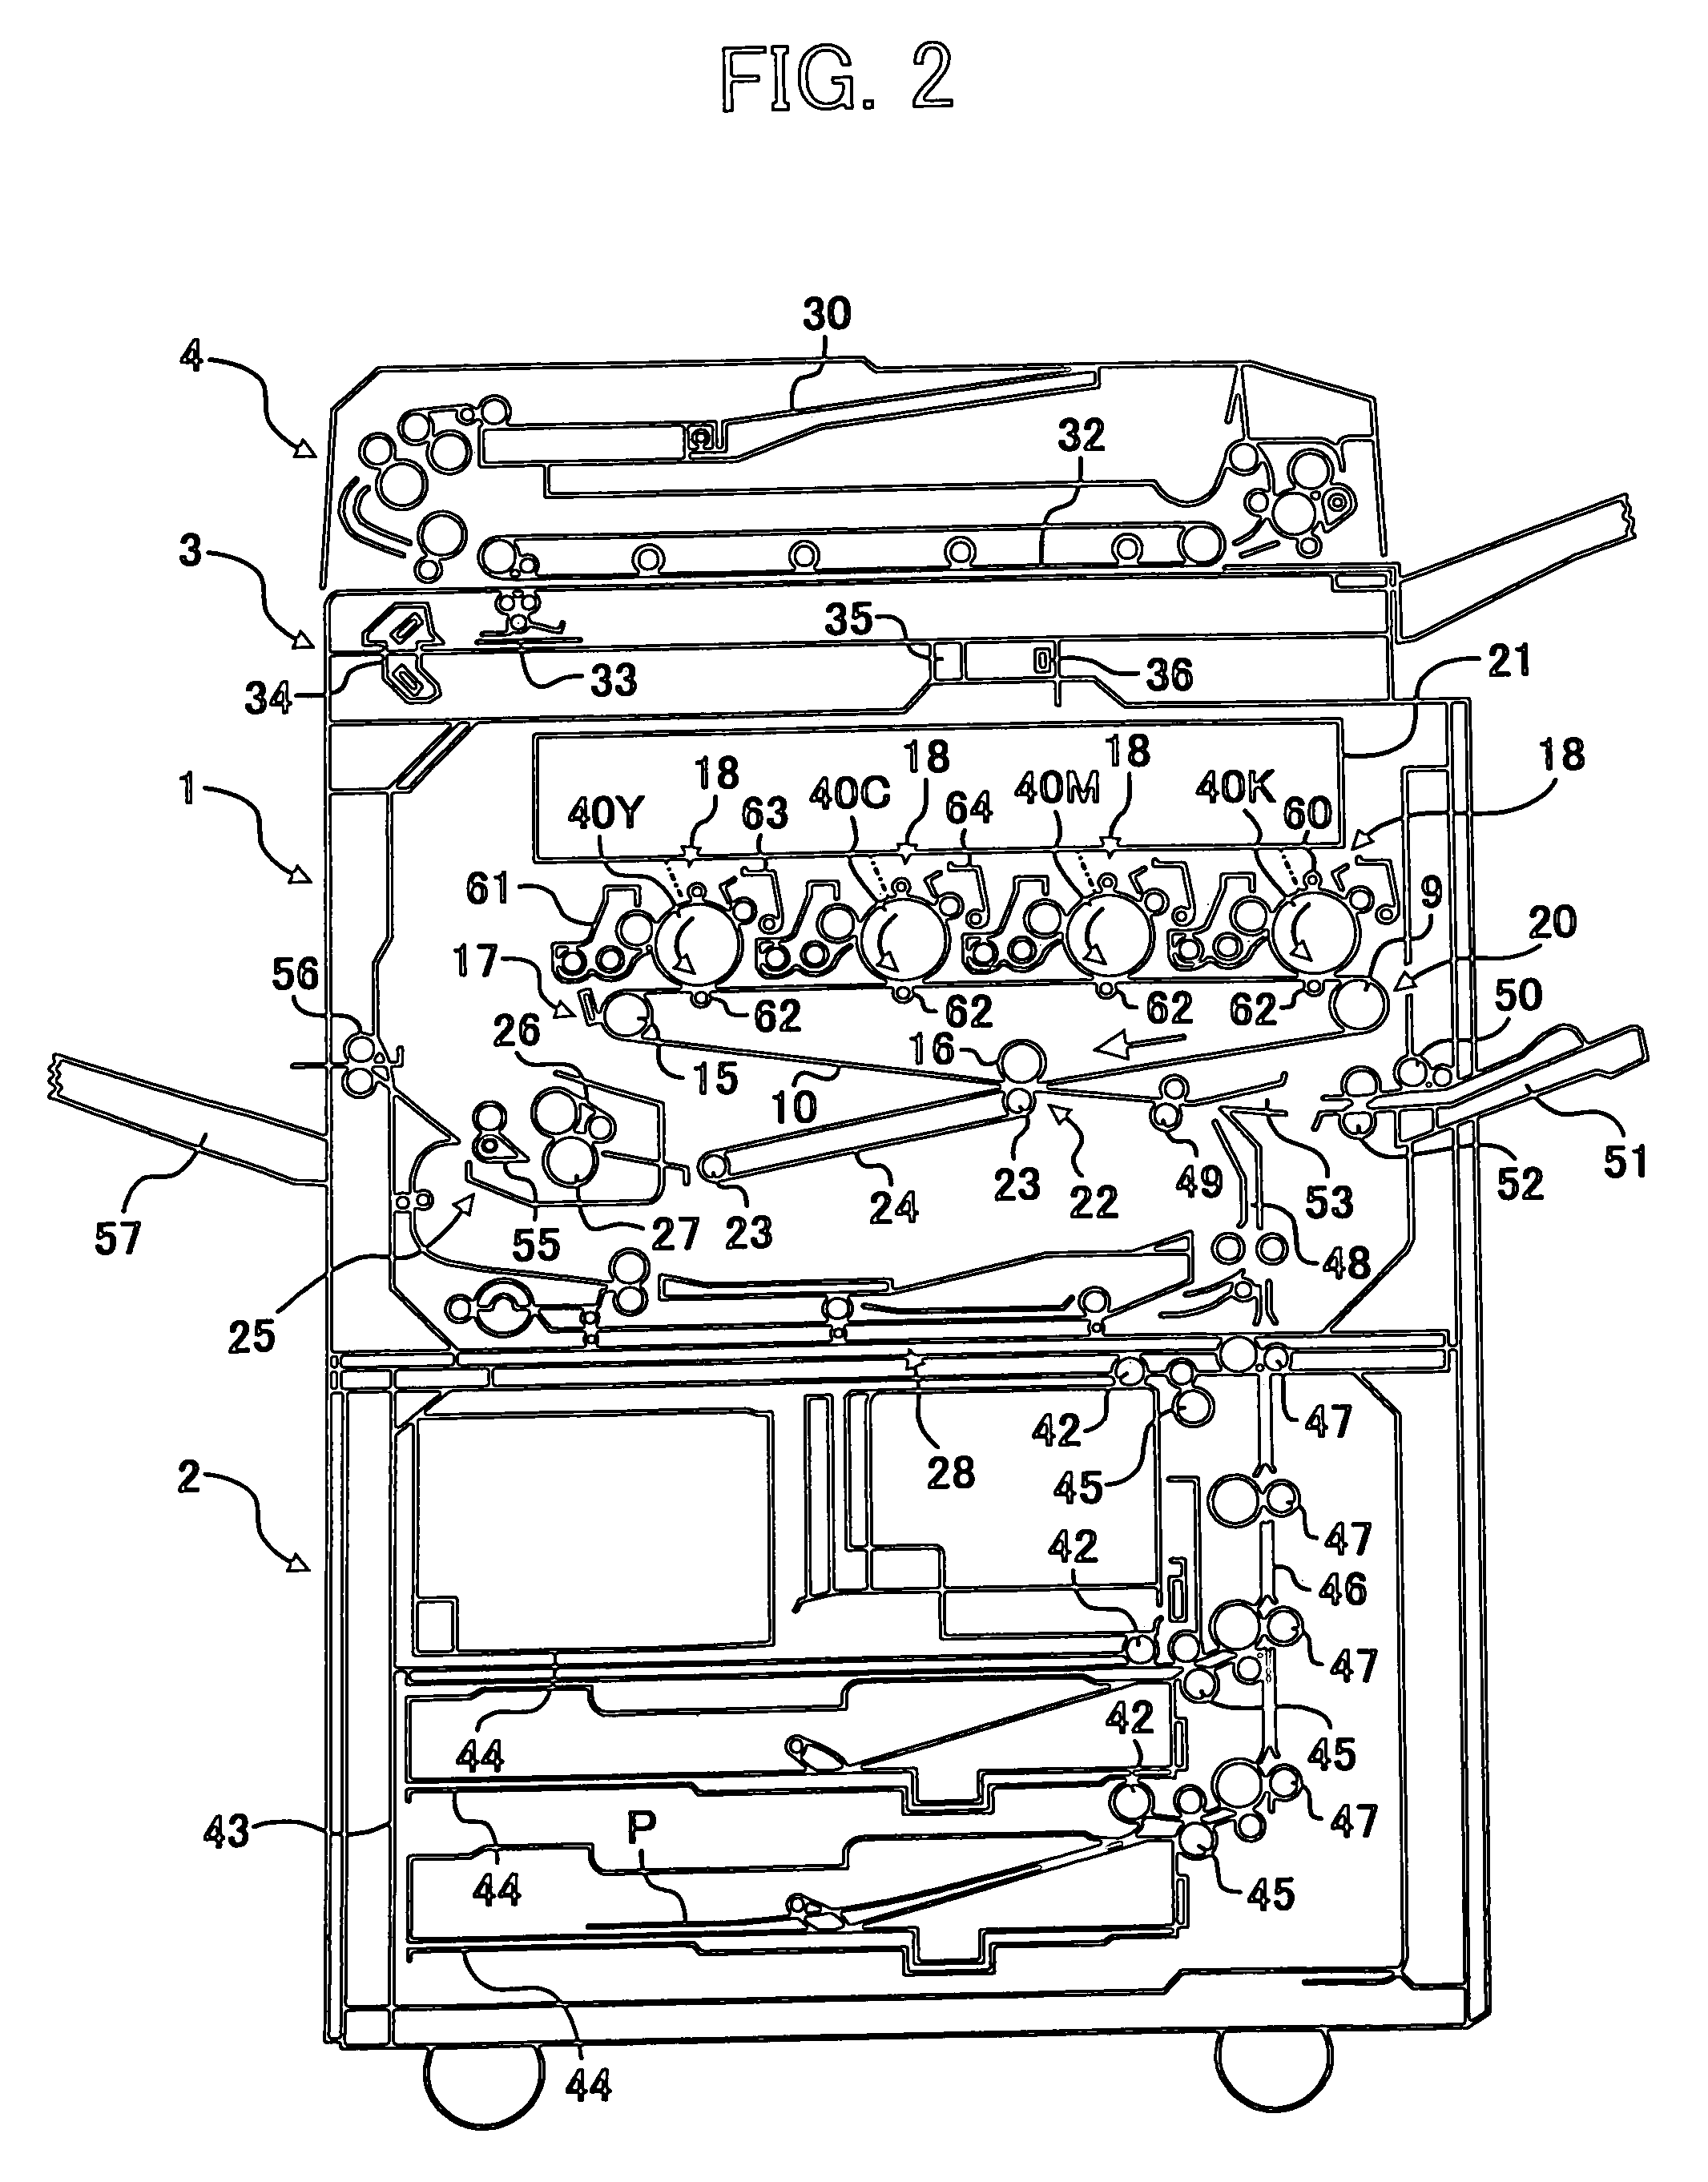 Belt device, image forming apparatus, and method to control belt speed